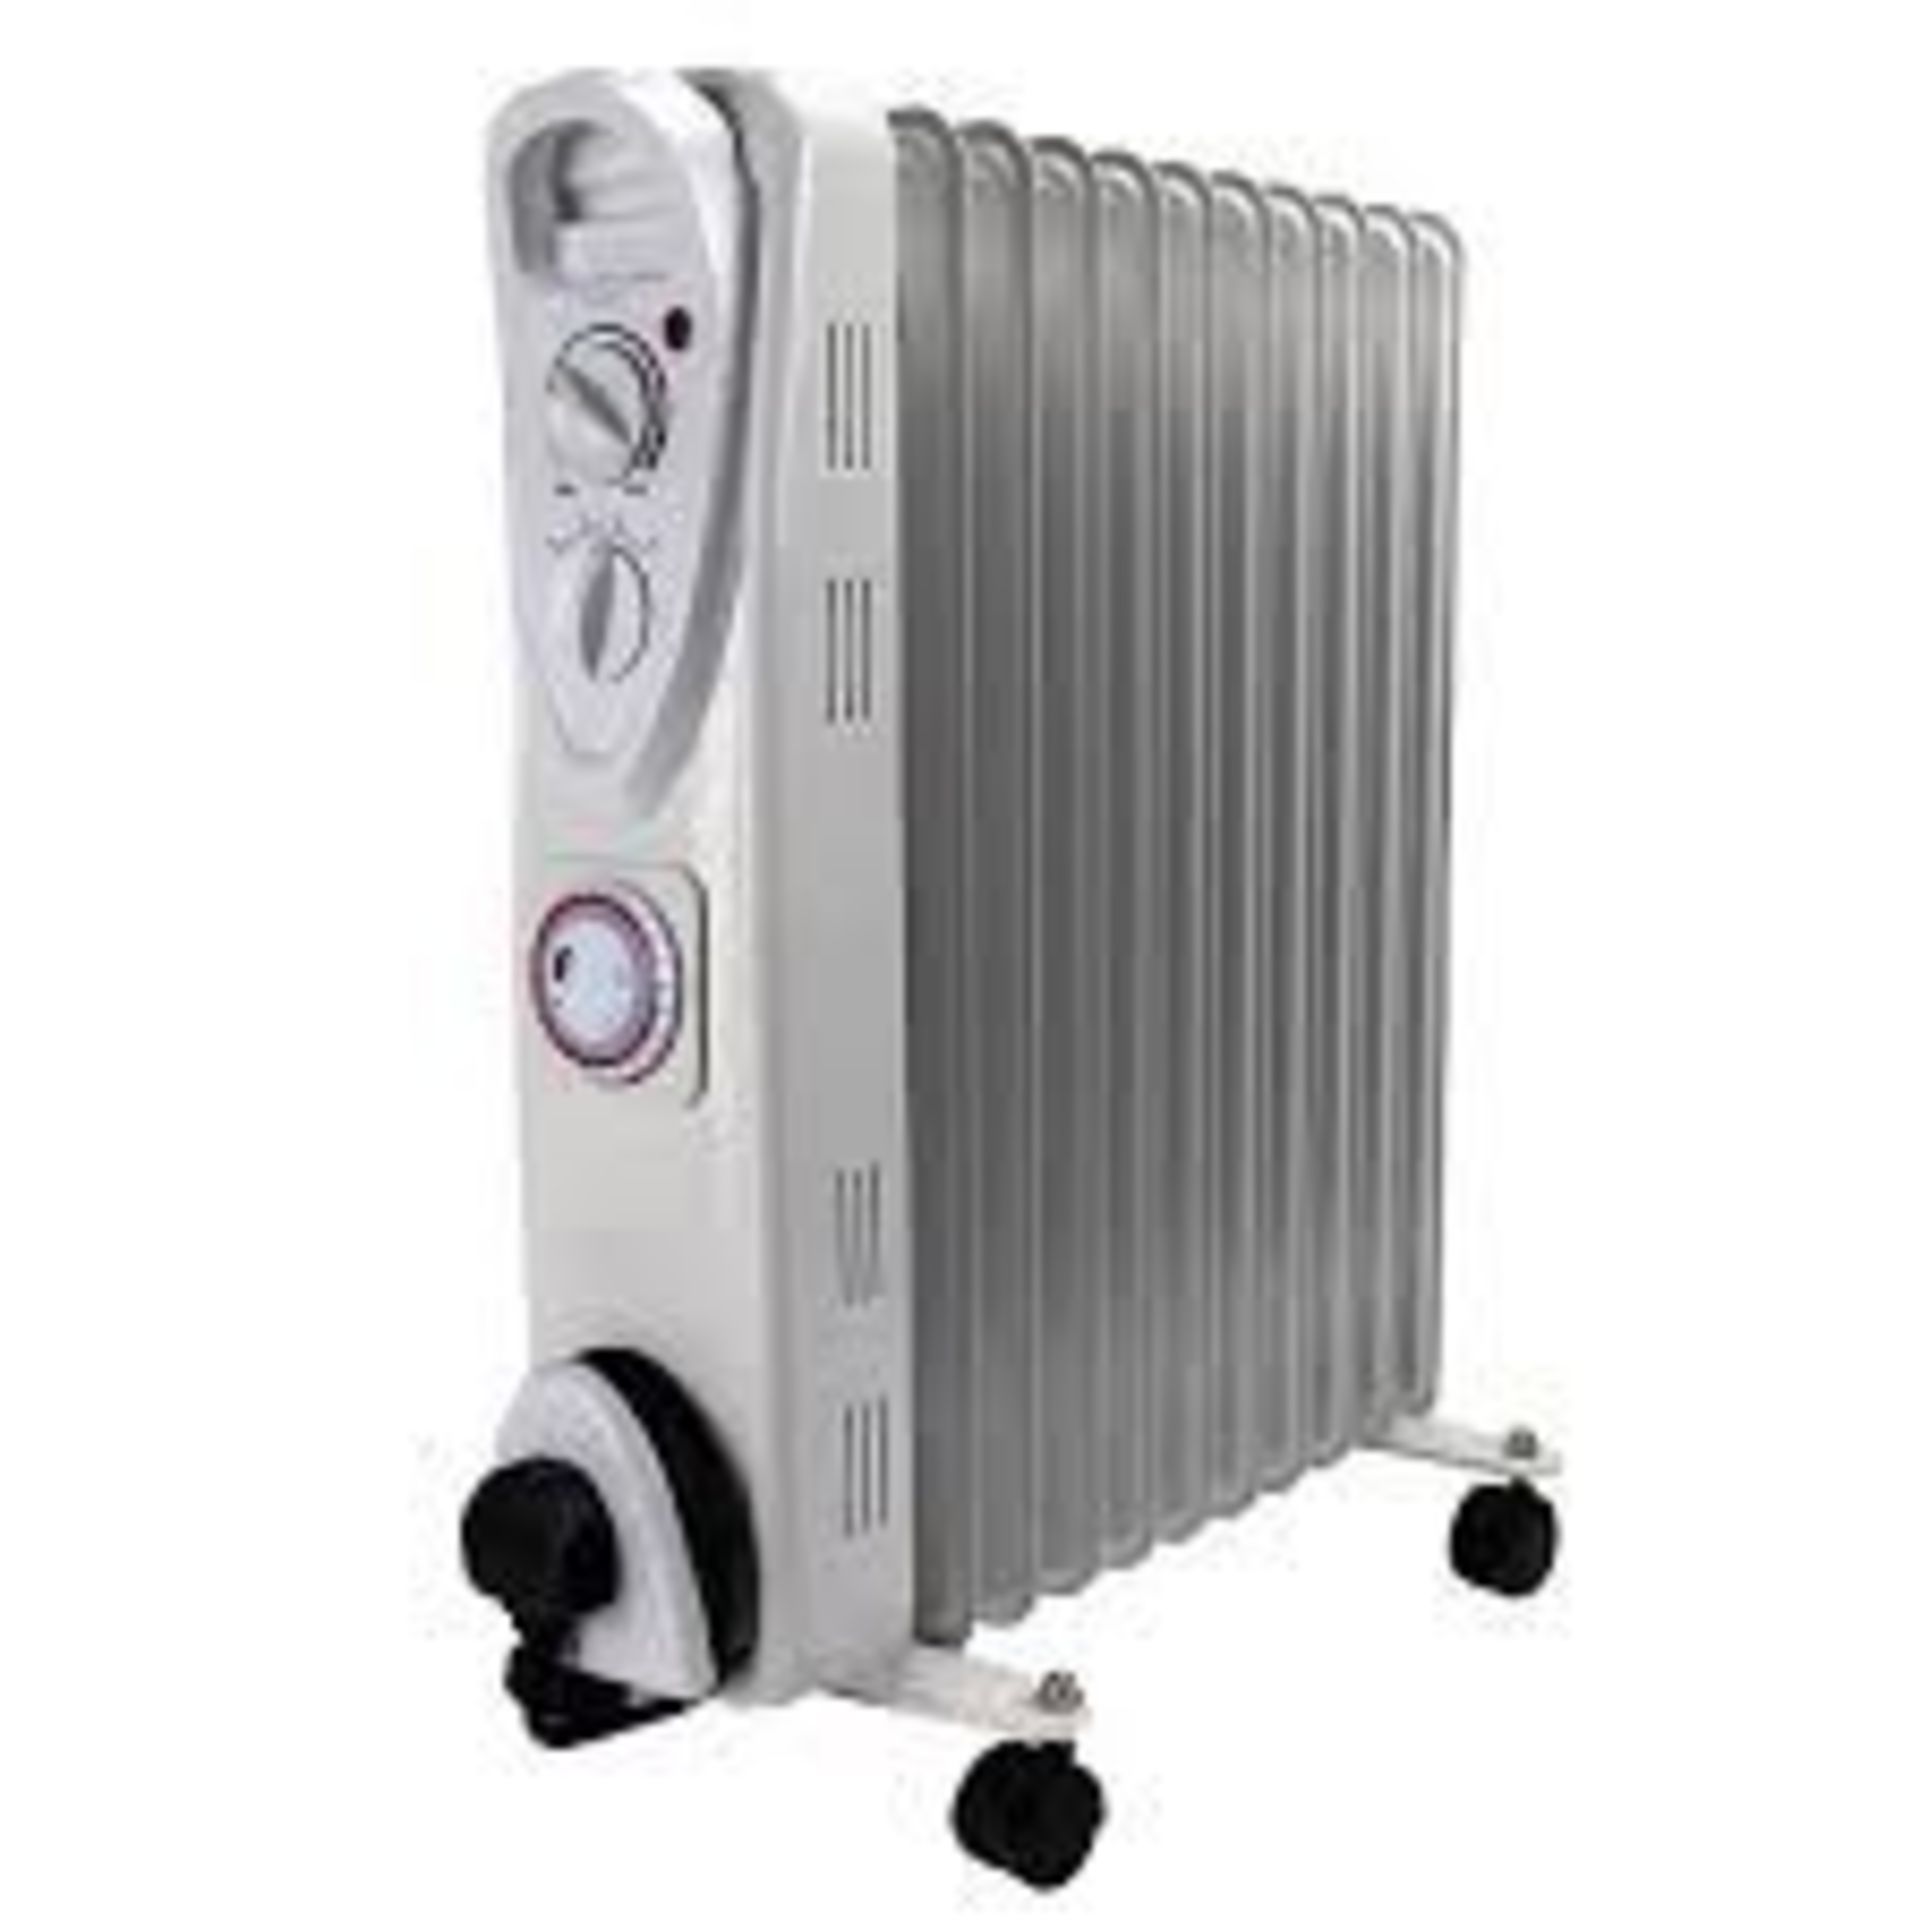 OIL Filled Radiator Heater with 24 hour TIMER - Electric 11 Fin 2.5KW. -R14.17.